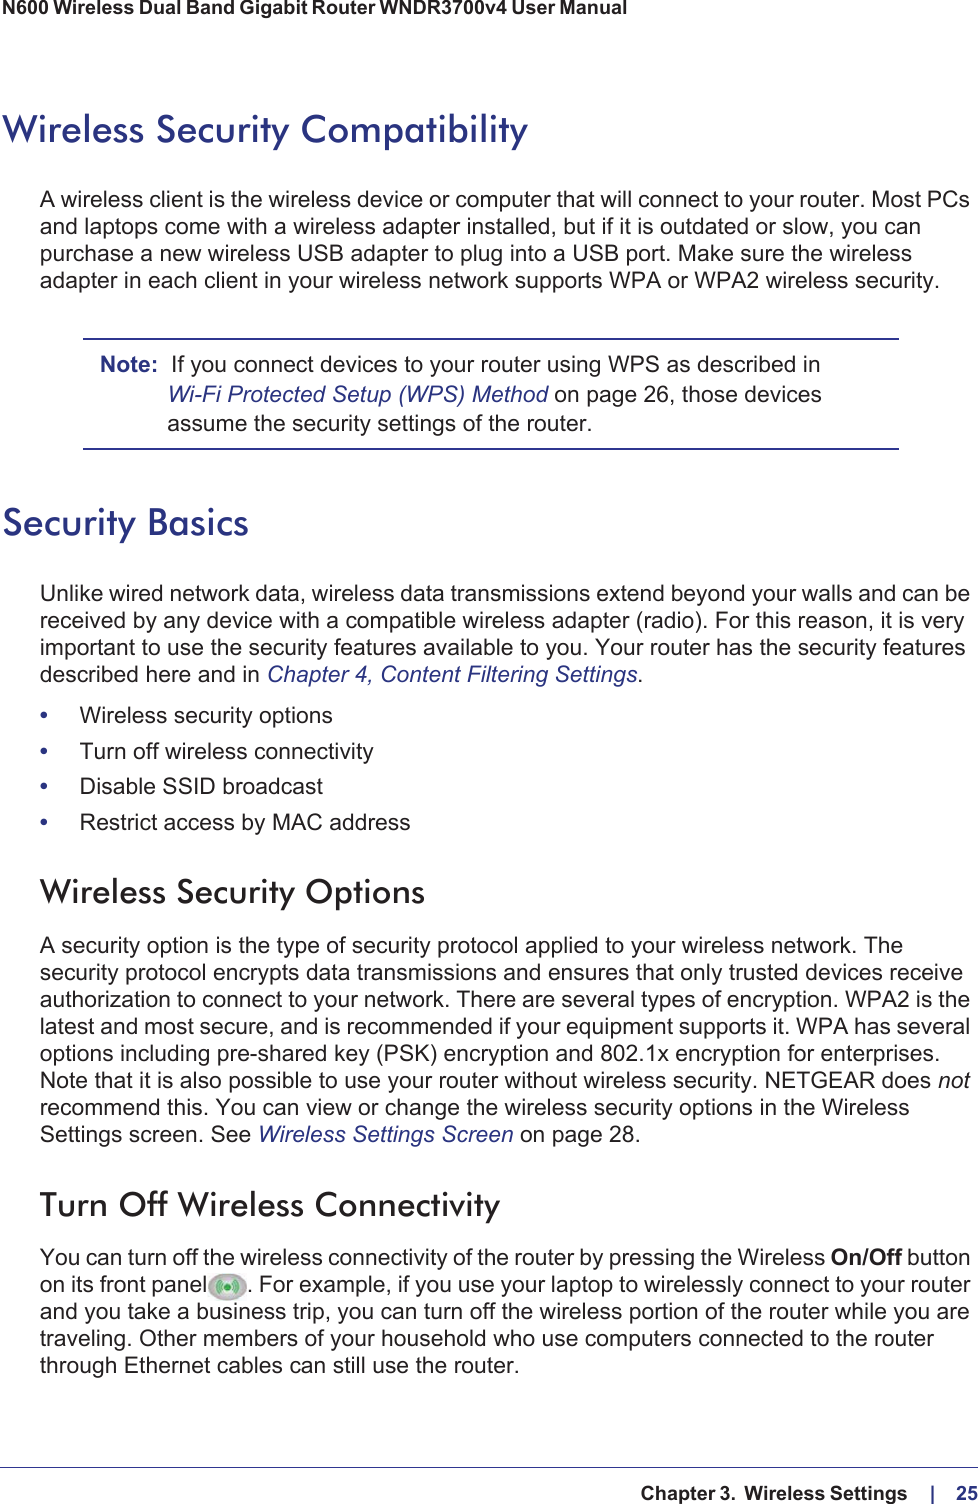   Chapter 3.  Wireless Settings     |    25N600 Wireless Dual Band Gigabit Router WNDR3700v4 User Manual Wireless Security CompatibilityA wireless client is the wireless device or computer that will connect to your router. Most PCs and laptops come with a wireless adapter installed, but if it is outdated or slow, you can purchase a new wireless USB adapter to plug into a USB port. Make sure the wireless adapter in each client in your wireless network supports WPA or WPA2 wireless security. Note: If you connect devices to your router using WPS as described in Wi-Fi Protected Setup (WPS) Method on page  26, those devices assume the security settings of the router.Security BasicsUnlike wired network data, wireless data transmissions extend beyond your walls and can be received by any device with a compatible wireless adapter (radio). For this reason, it is very important to use the security features available to you. Your router has the security features described here and in Chapter 4, Content Filtering Settings.•Wireless security options•Turn off wireless connectivity•Disable SSID broadcast•Restrict access by MAC addressWireless Security OptionsA security option is the type of security protocol applied to your wireless network. The security protocol encrypts data transmissions and ensures that only trusted devices receive authorization to connect to your network. There are several types of encryption. WPA2 is the latest and most secure, and is recommended if your equipment supports it. WPA has several options including pre-shared key (PSK) encryption and 802.1x encryption for enterprises. Note that it is also possible to use your router without wireless security. NETGEAR does not recommend this. You can view or change the wireless security options in the Wireless Settings screen. See Wireless Settings Screen on page  28.Turn Off Wireless ConnectivityYou can turn off the wireless connectivity of the router by pressing the Wireless On/Off button on its front panel. For example, if you use your laptop to wirelessly connect to your router and you take a business trip, you can turn off the wireless portion of the router while you are traveling. Other members of your household who use computers connected to the router through Ethernet cables can still use the router.